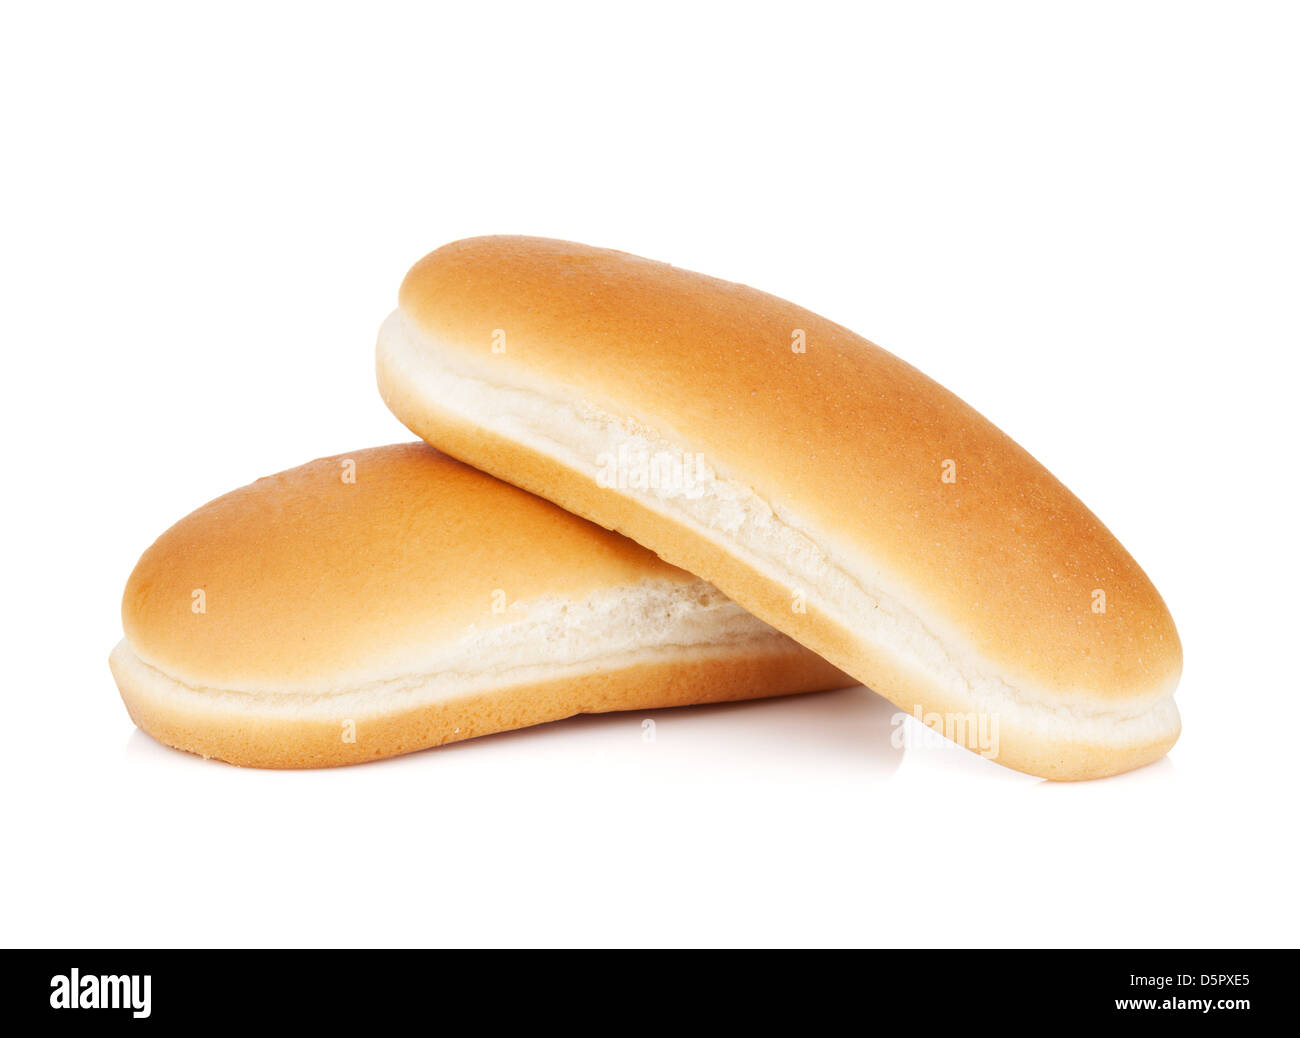 https://c8.alamy.com/comp/D5PXE5/two-hot-dog-buns-isolated-on-white-background-D5PXE5.jpg